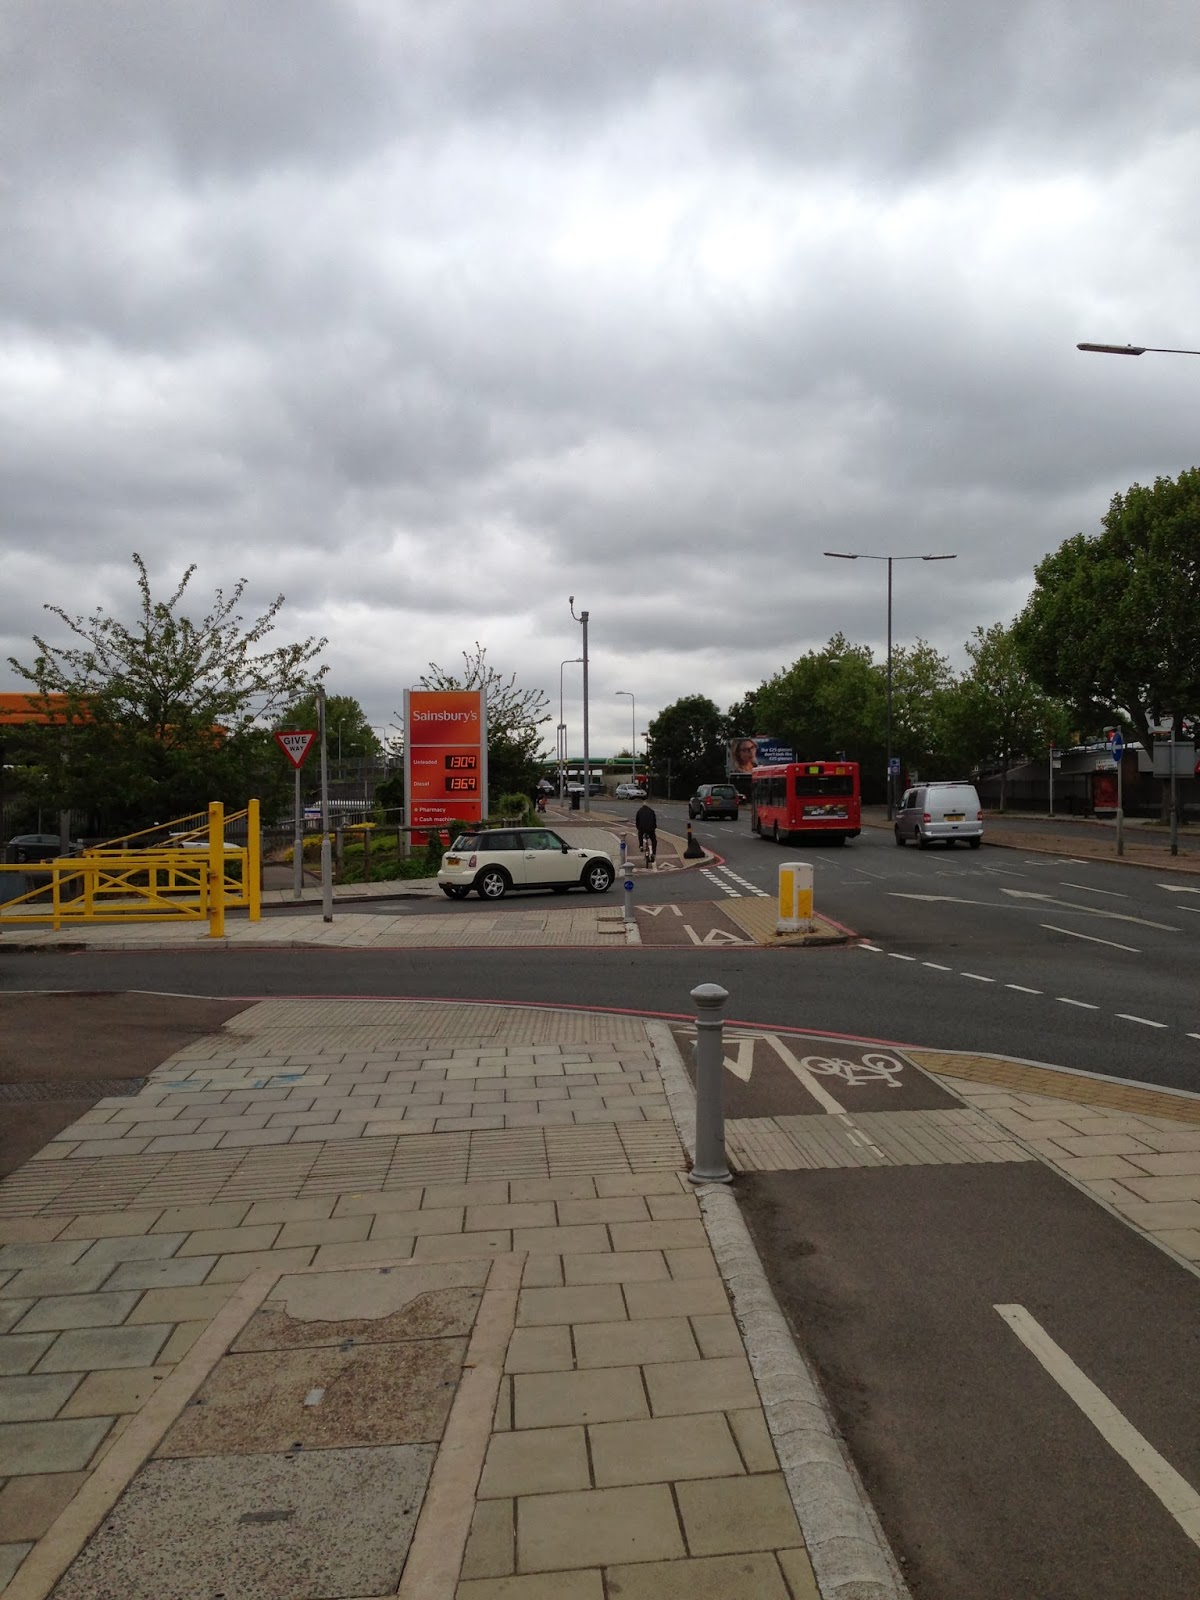 Cycle land on Lower Richmond Road (A316) interrupted by Sainsbury's entrance